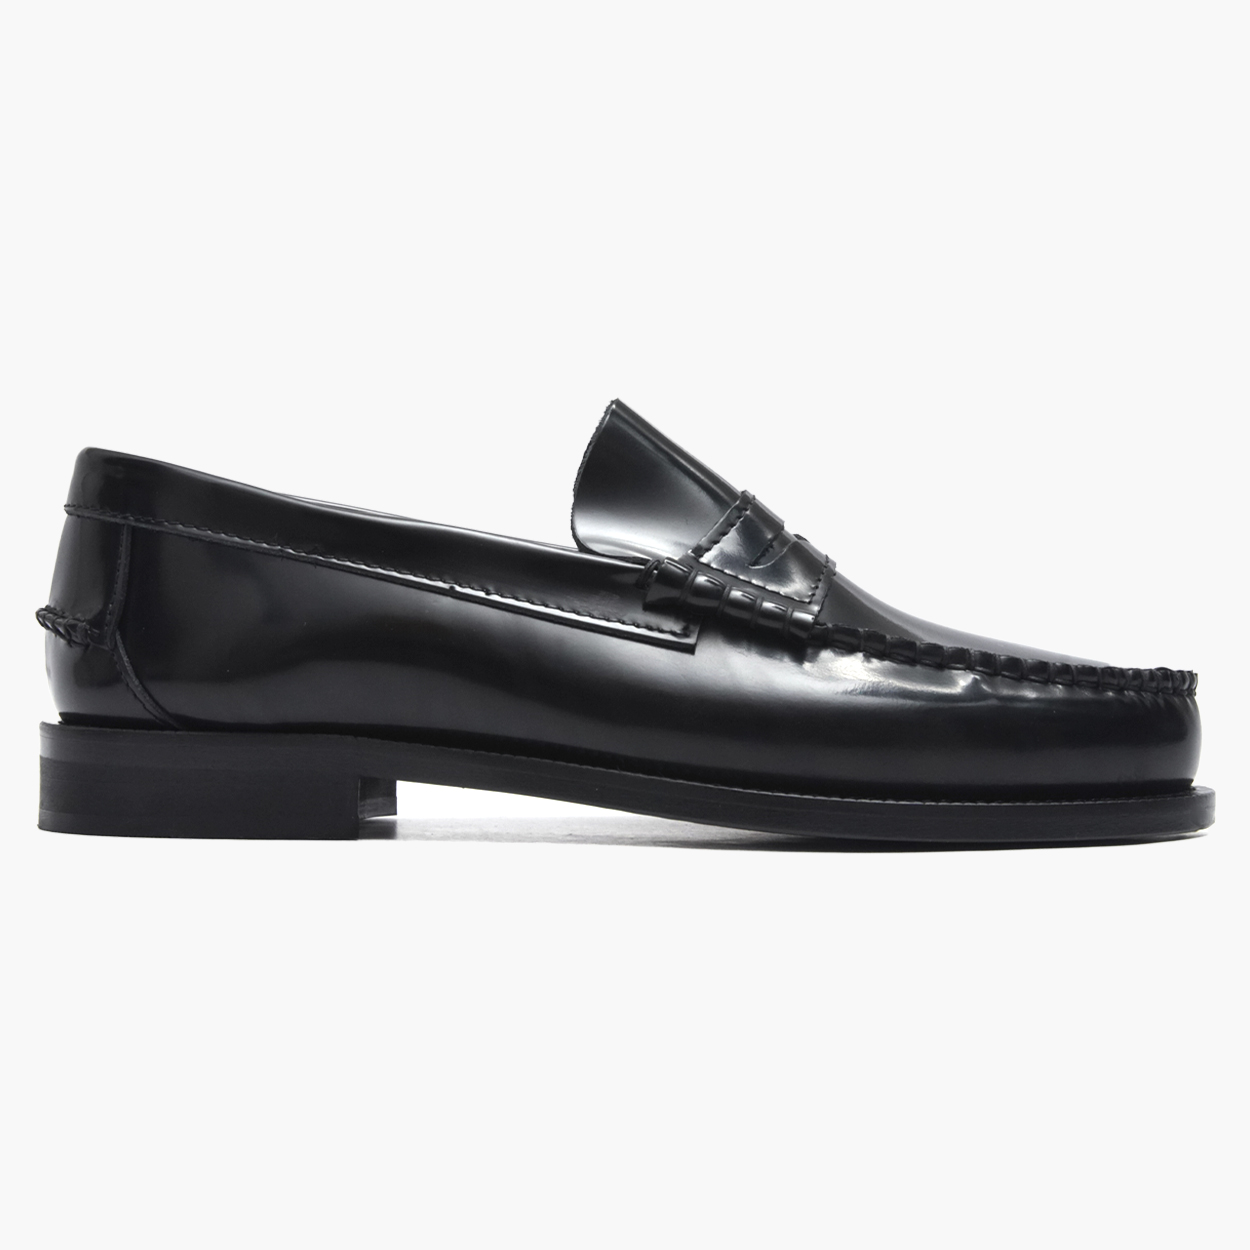 Black patent leather penny loafers Women, Simons